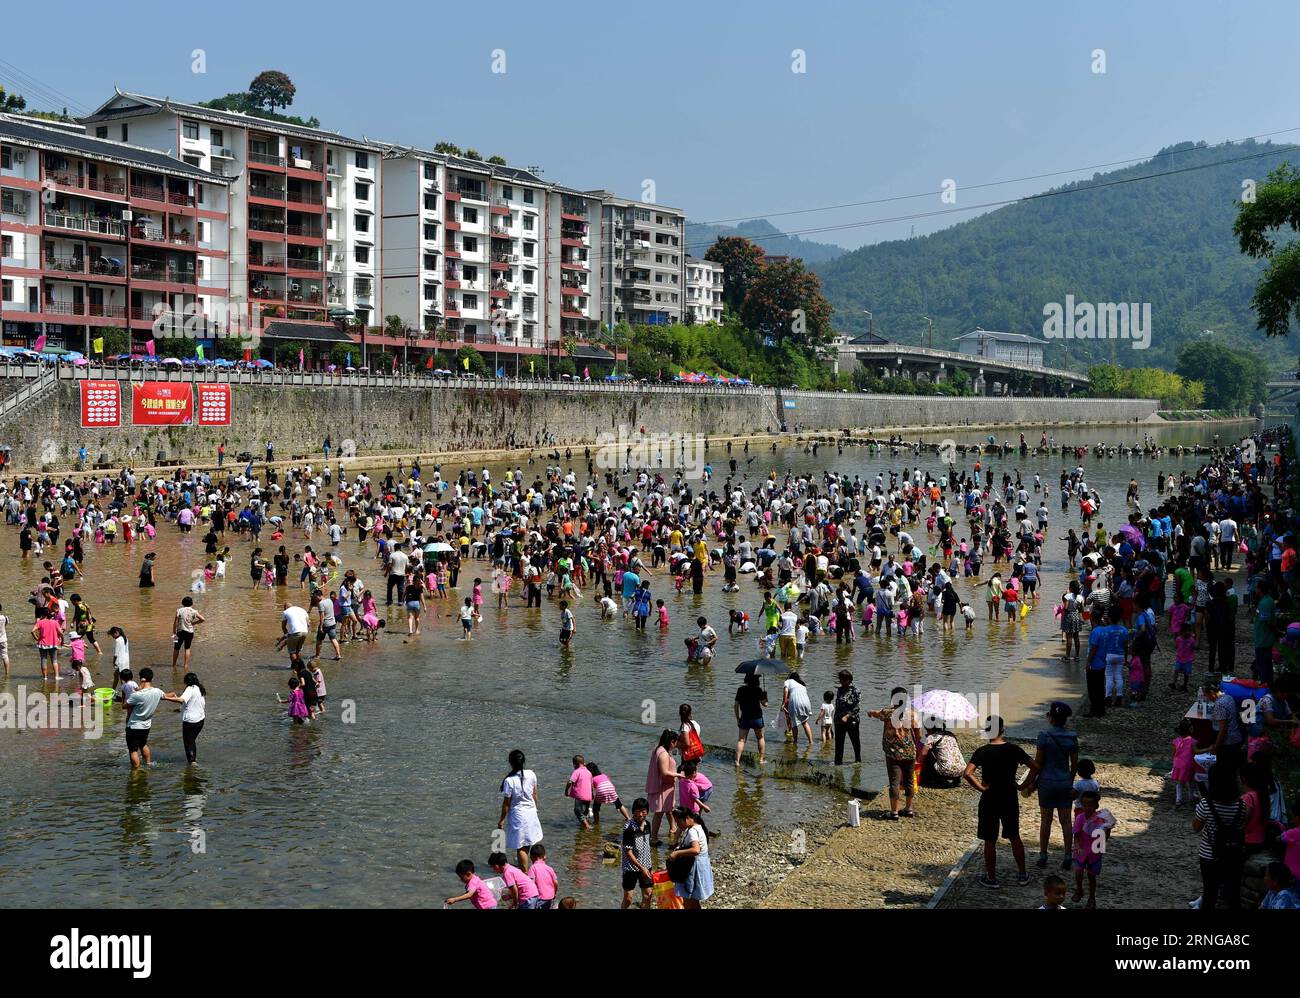 ENSHI, Sept. 16, 2016 -- Local people gather to catch fish by hands in a river to celebrate a good harvest in Xuanen County, central China s Hubei Province, Sept. 16, 2016. ) (cxy) CHINA-HUBEI-FISH CATCHING (CN) SongxWen PUBLICATIONxNOTxINxCHN   Enshi Sept 16 2016 Local Celebrities gather to Catch Fish by Hands in a River to Celebrate a Good Harvest in Xuanen County Central China S Hubei Province Sept 16 2016 Cxy China Hubei Fish Catching CN SongxWen PUBLICATIONxNOTxINxCHN Stock Photo